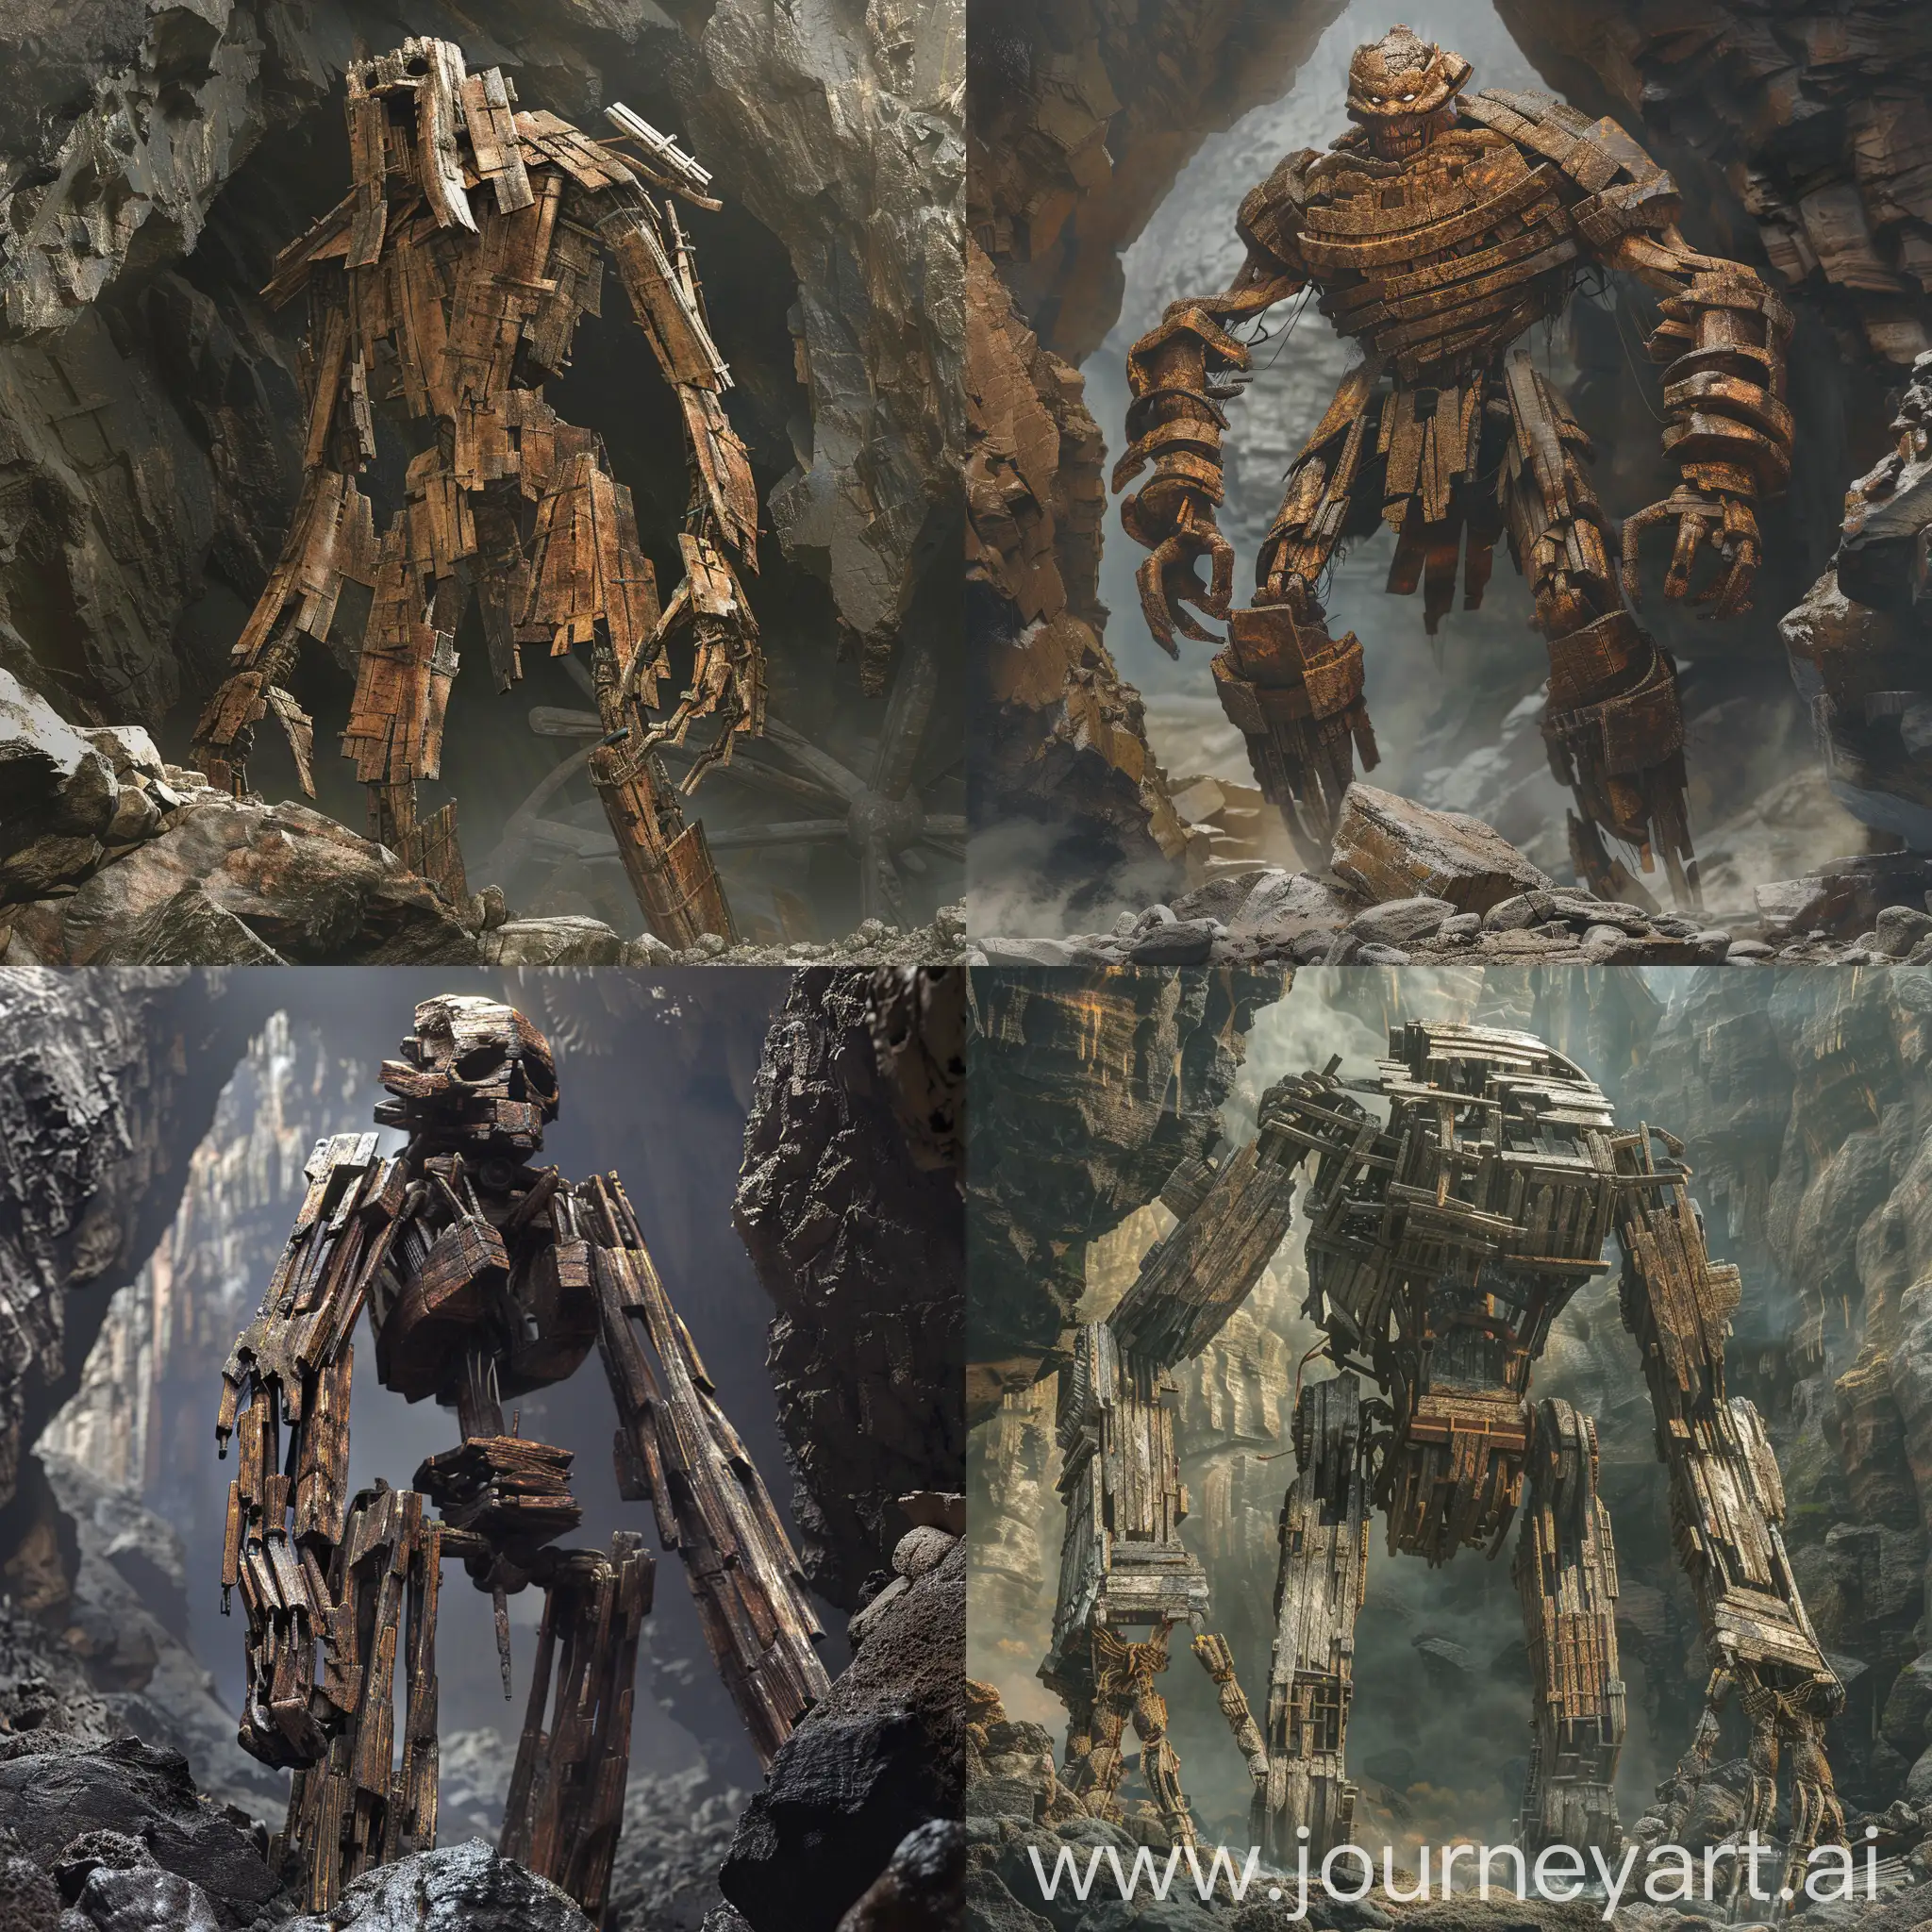 A golem created from the remains of wooden ships stands in a volcano cave.